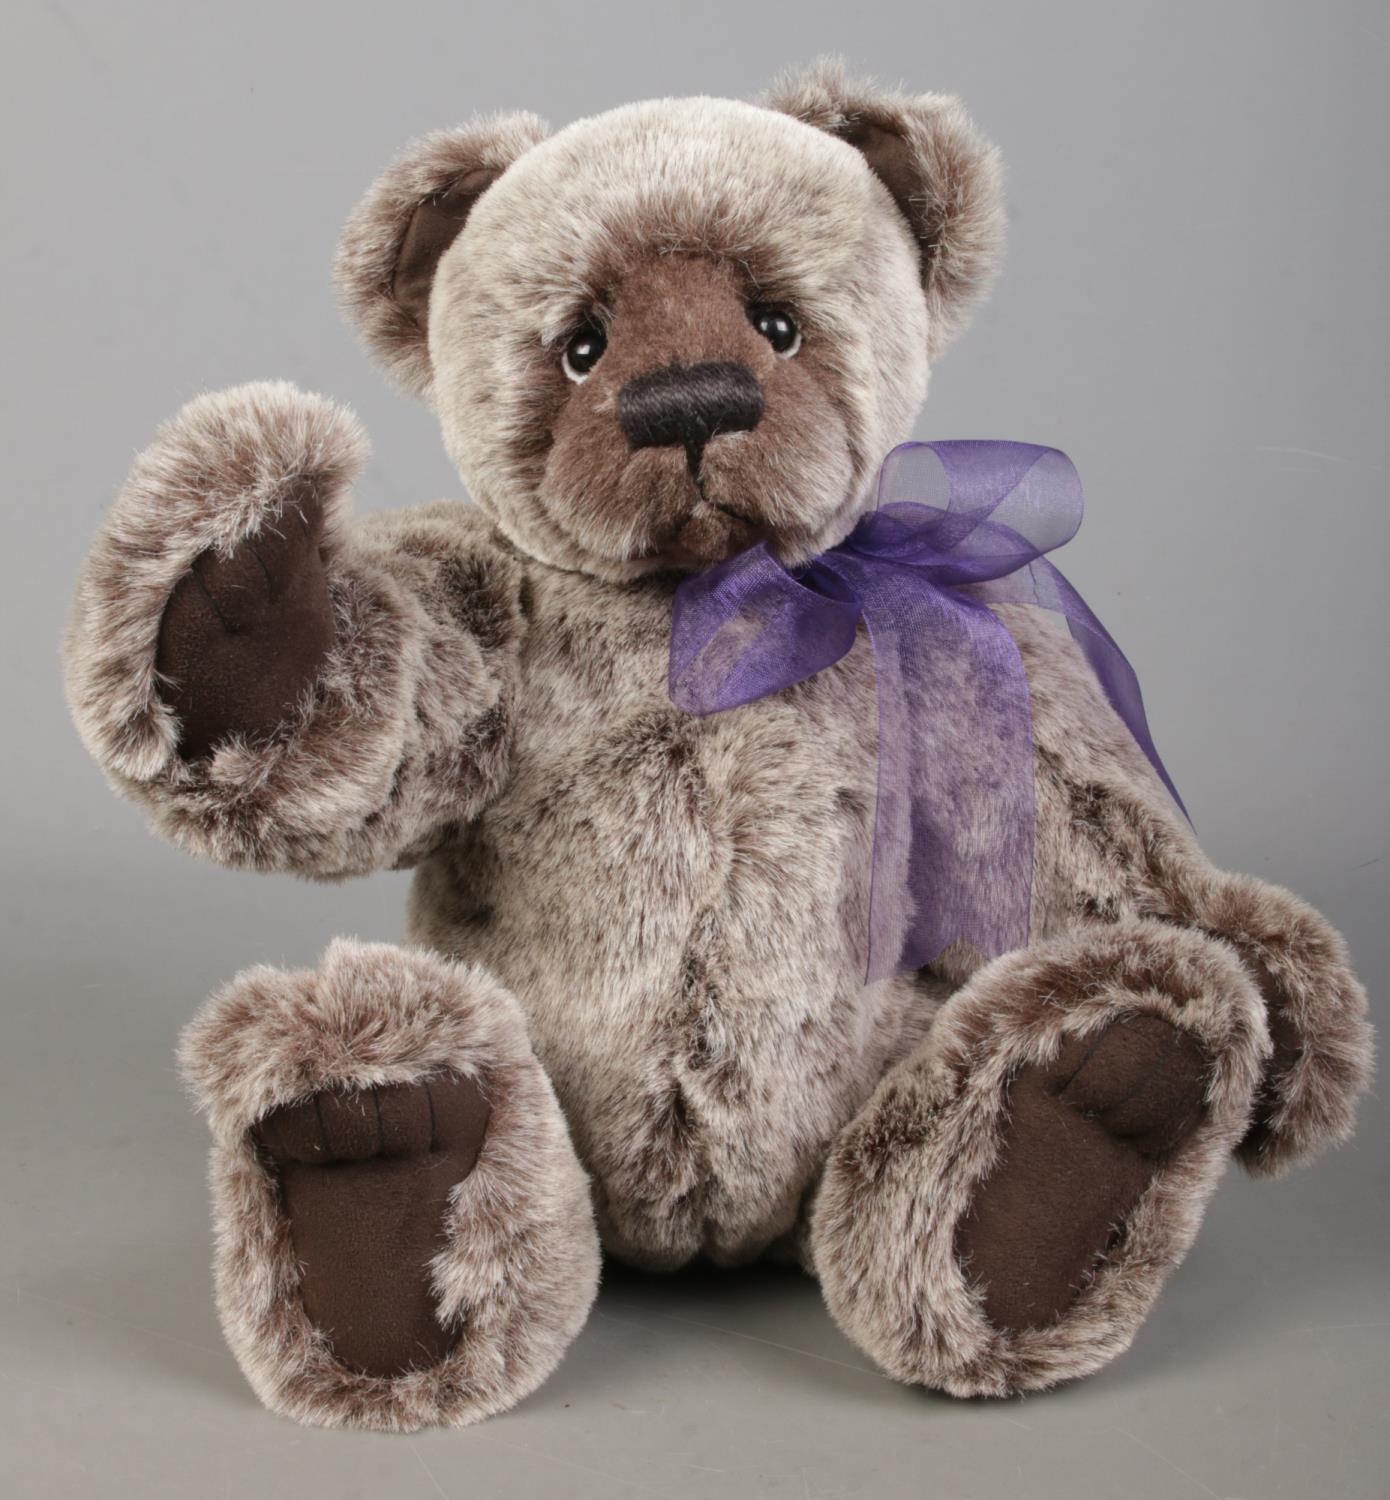 A Charlie Bears jointed teddy bear, Sid. Exclusively designed by Christine Pike. With bow and